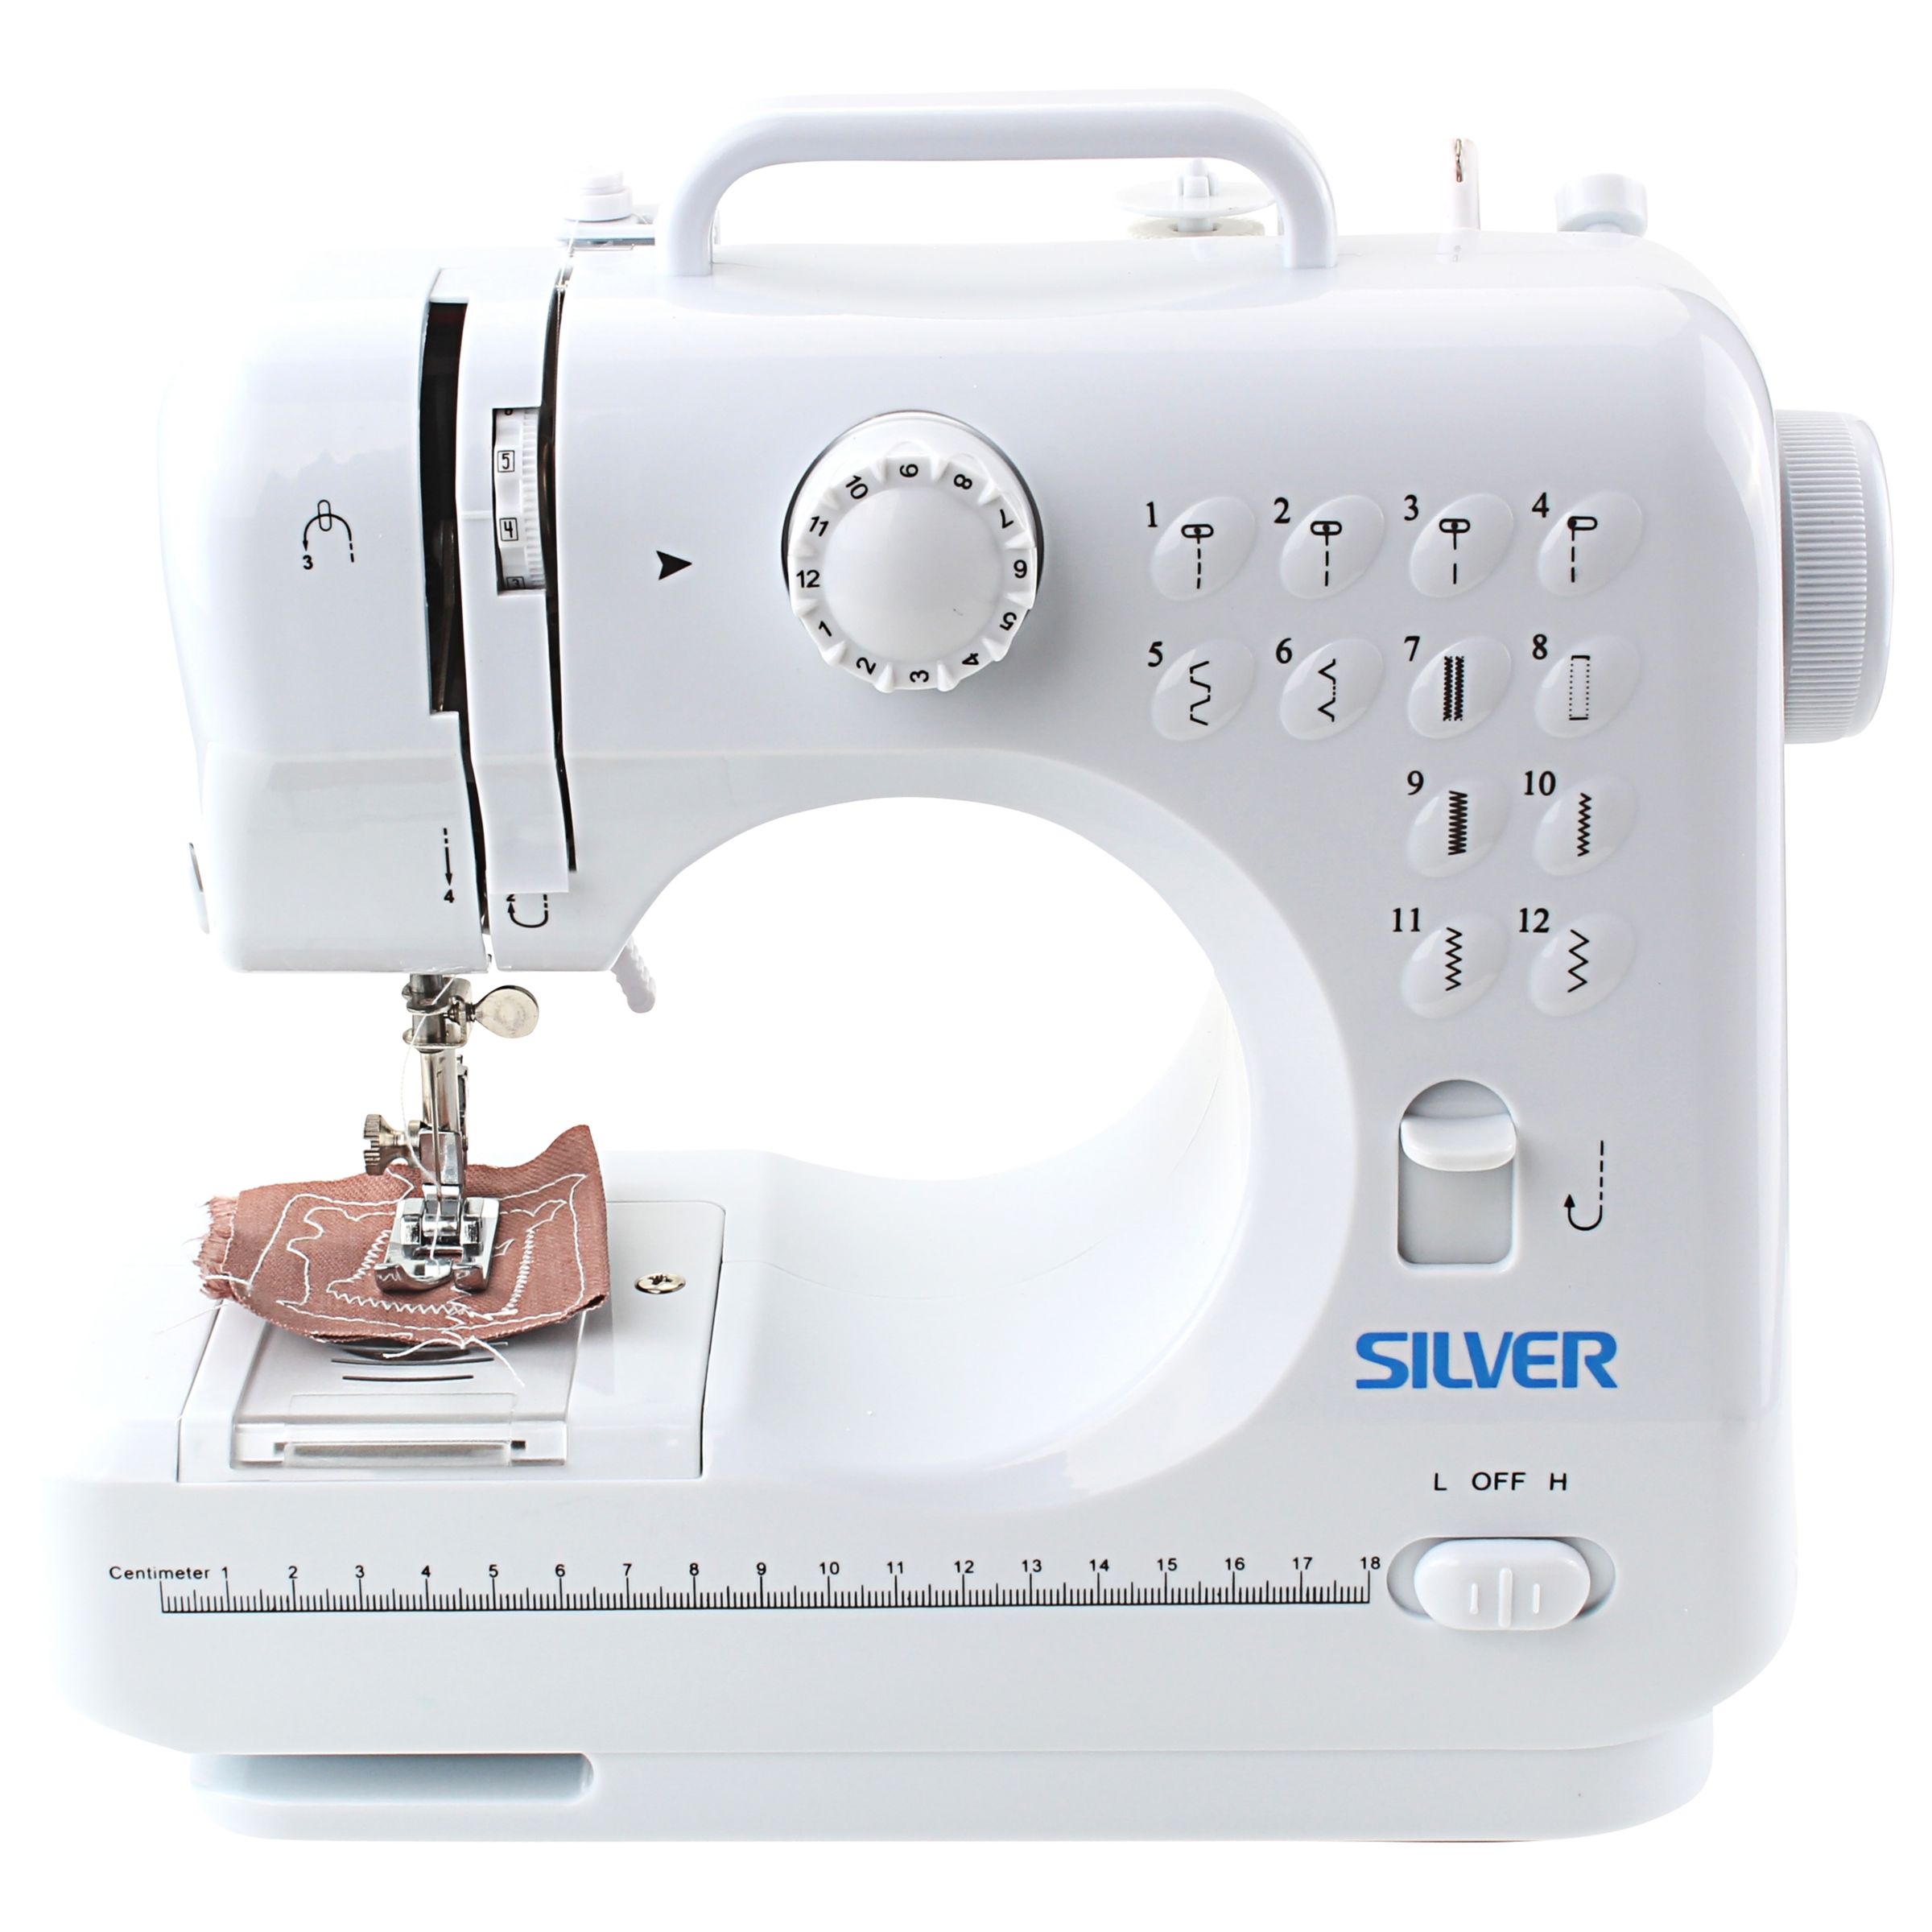 Mini Household Sewing Machine GD-015-A35 - Small Electric Overlock Sewing Machines with 2 Speed 12 Built-in Stitch Patterns UK Plug, 12 Stitches, 2 Speeds, LED Sewing Light Galadim Sewing Machine 